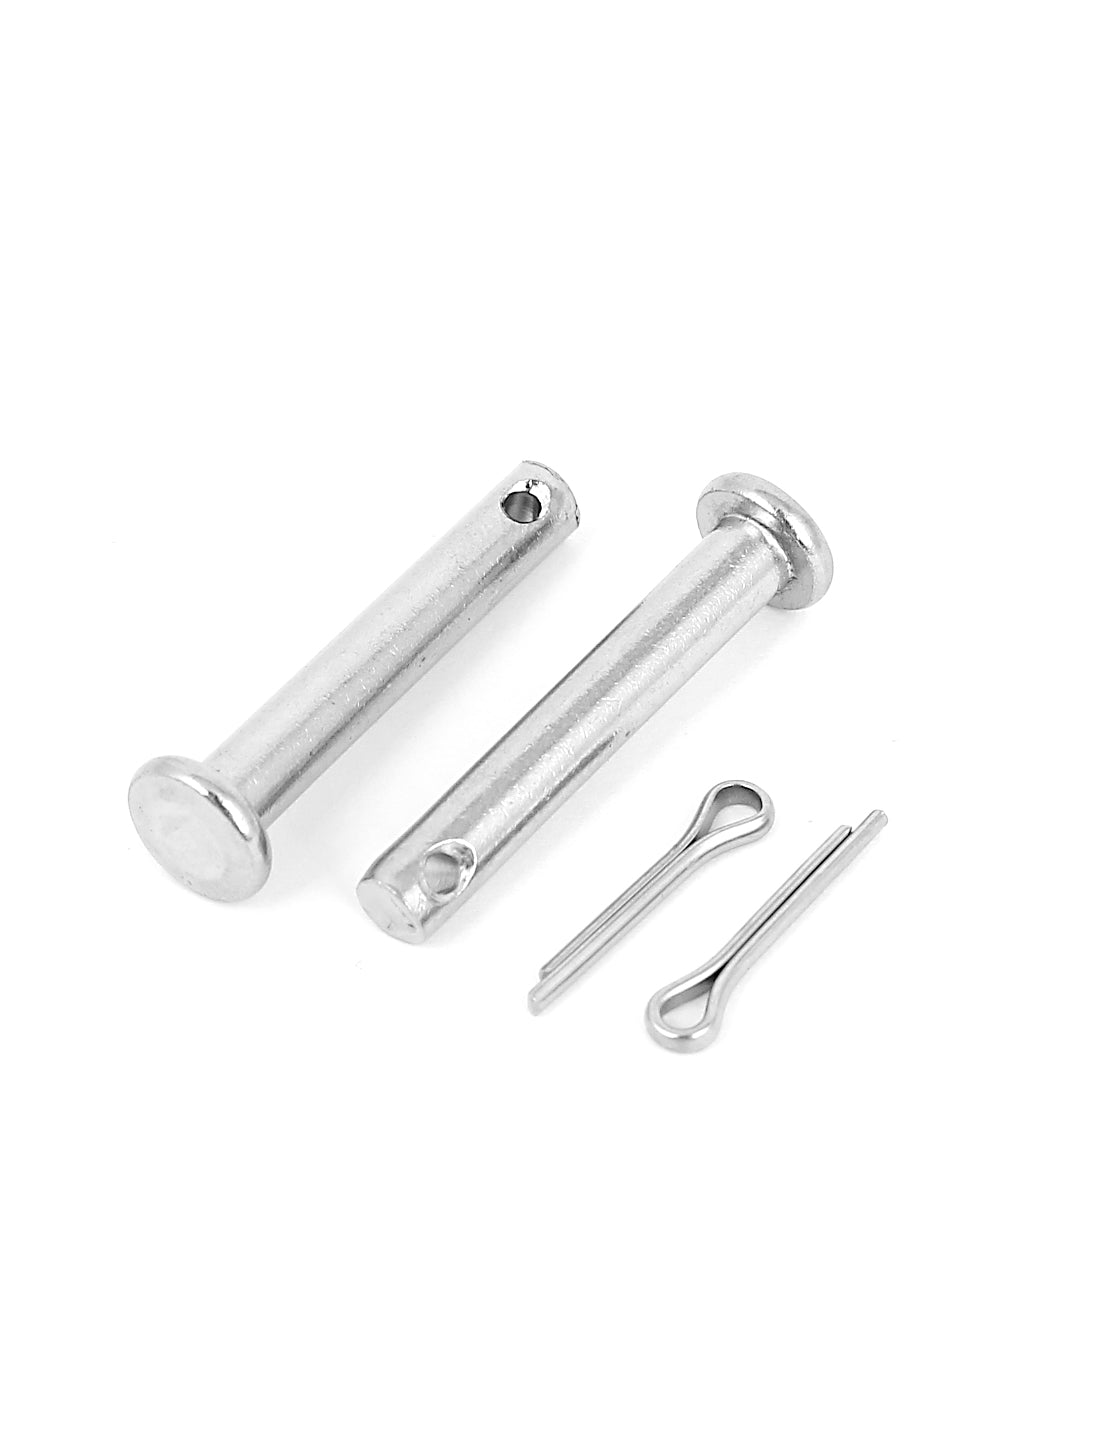 uxcell Uxcell M5 x 30mm Flat Head 304 Stainless Steel Round Clevis Pins Fastener 5pcs